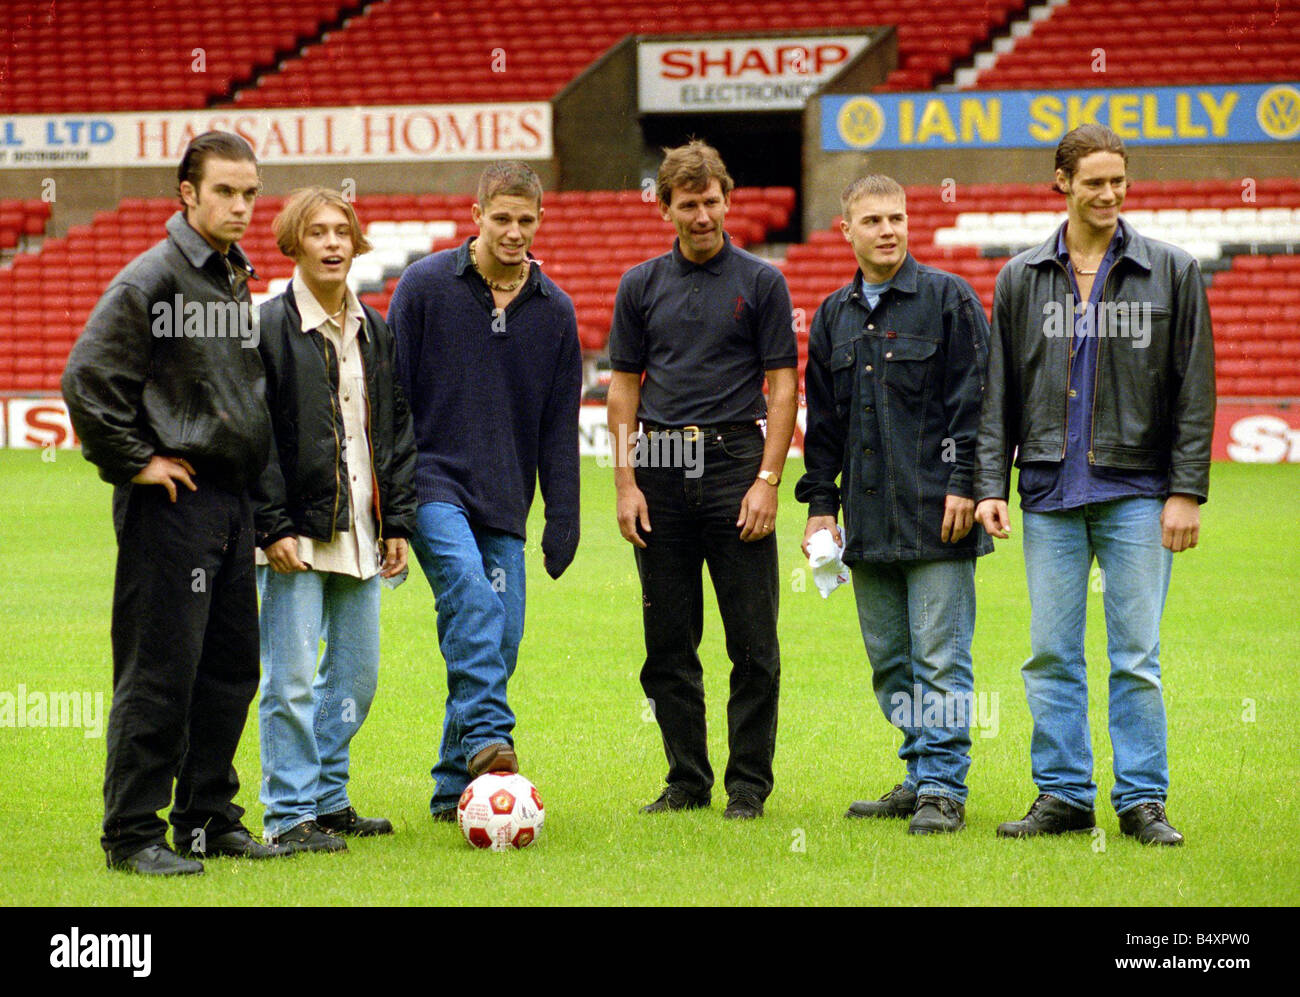 Members of pop group Take That left to right Robbie Williams mark Owen Jason orange Gary Barlow and Howard Donald with Bryan Robson of Manchester United at Old Trafford July 1993 Stock Photo